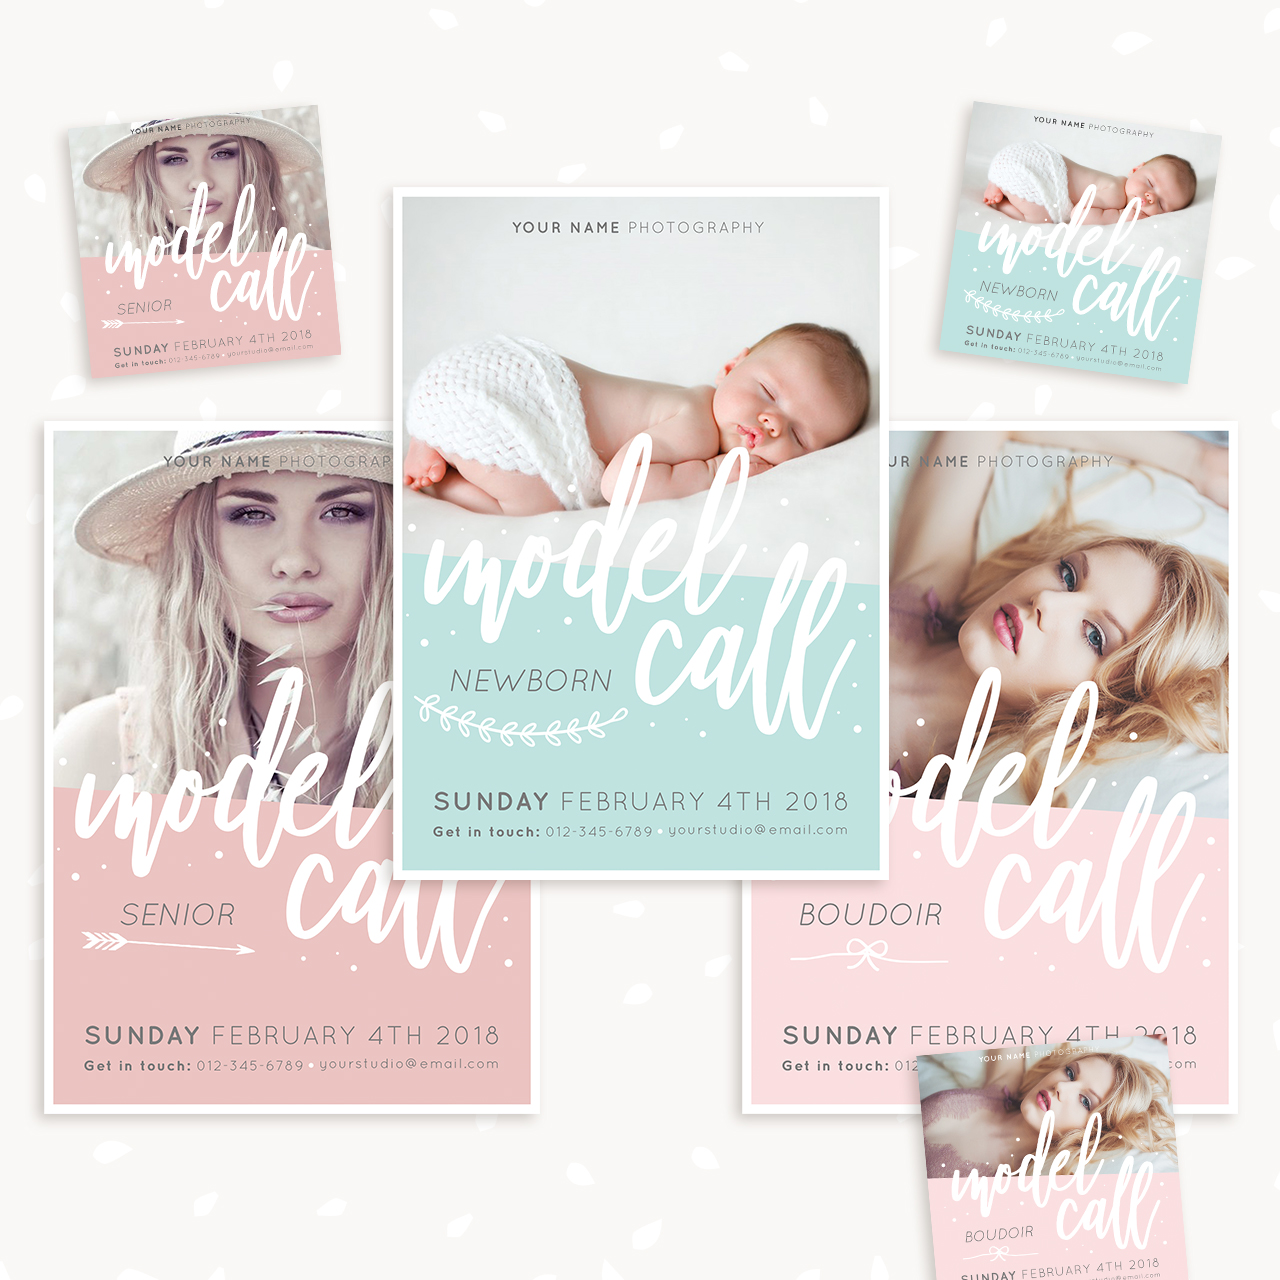 Model Call Templates for Photographers